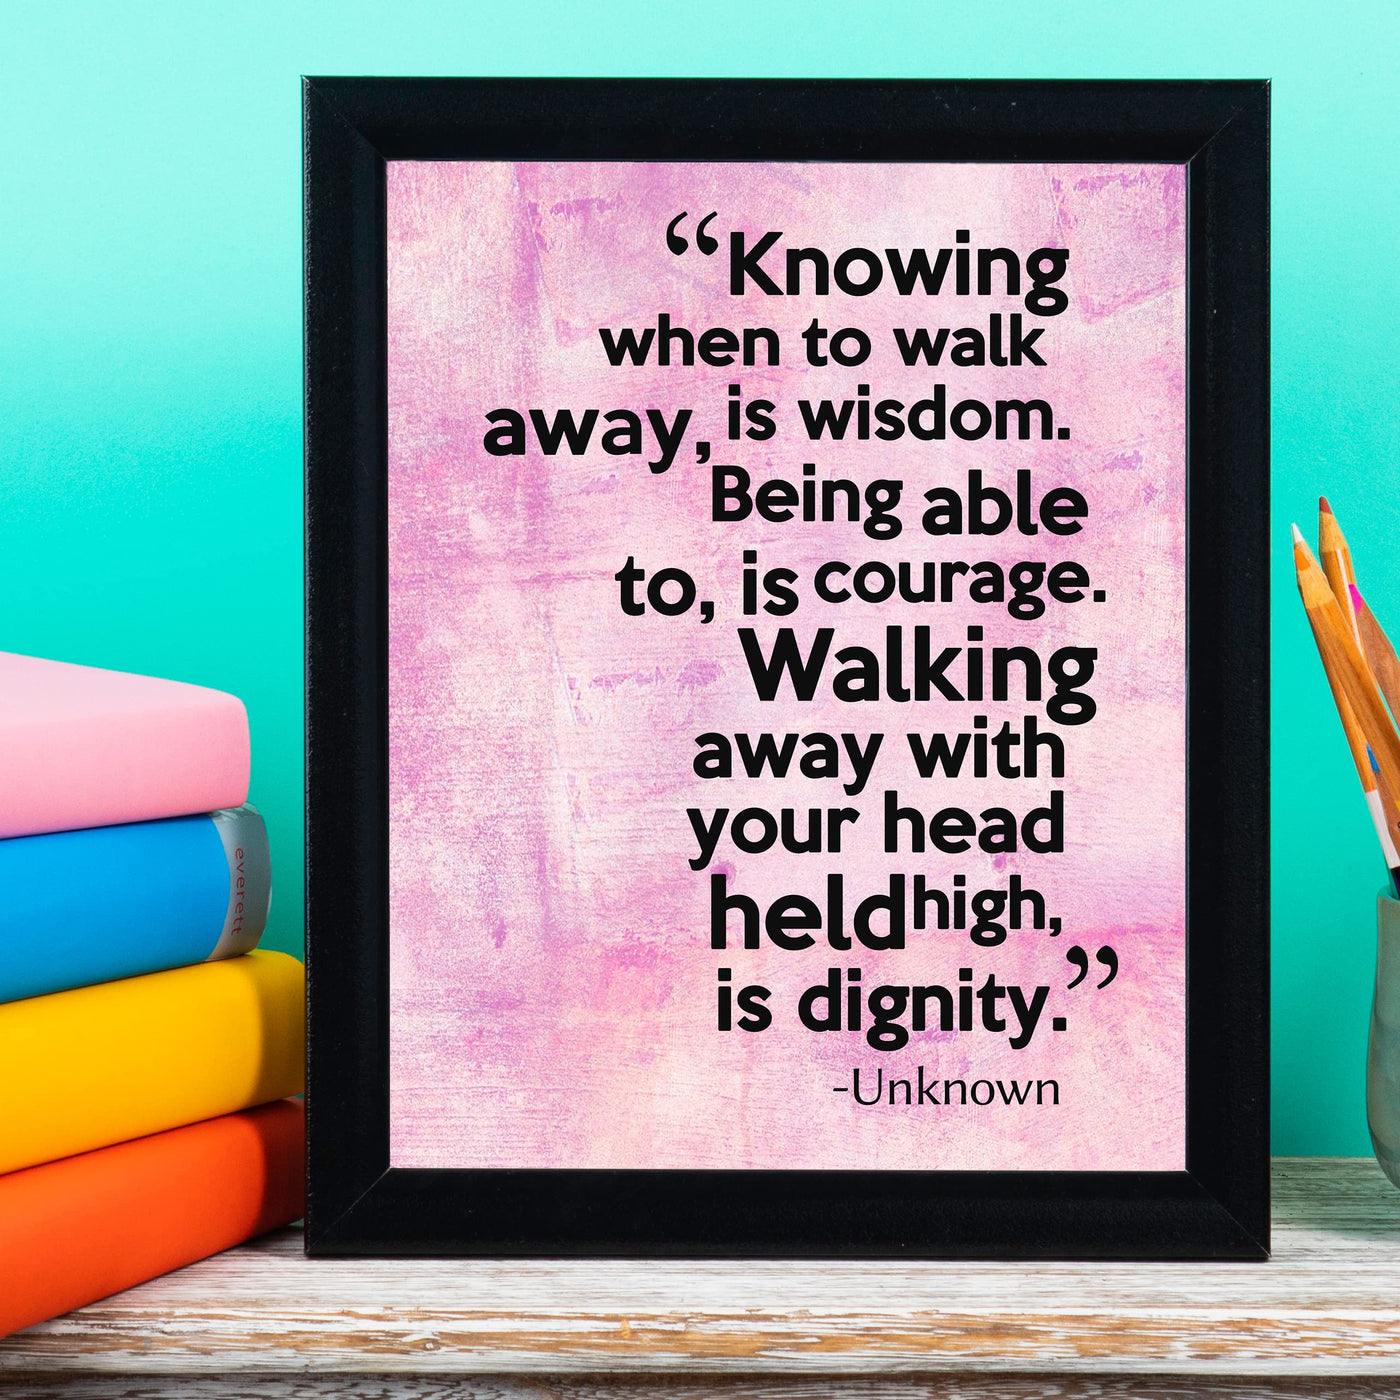 Knowing When to Walk Away Is Wisdom Inspirational Quotes Wall Art -8 x 10" Motivational Typography Print -Ready to Frame. Positive Decoration for Home-Office-School Decor. Great Gift and Reminder!